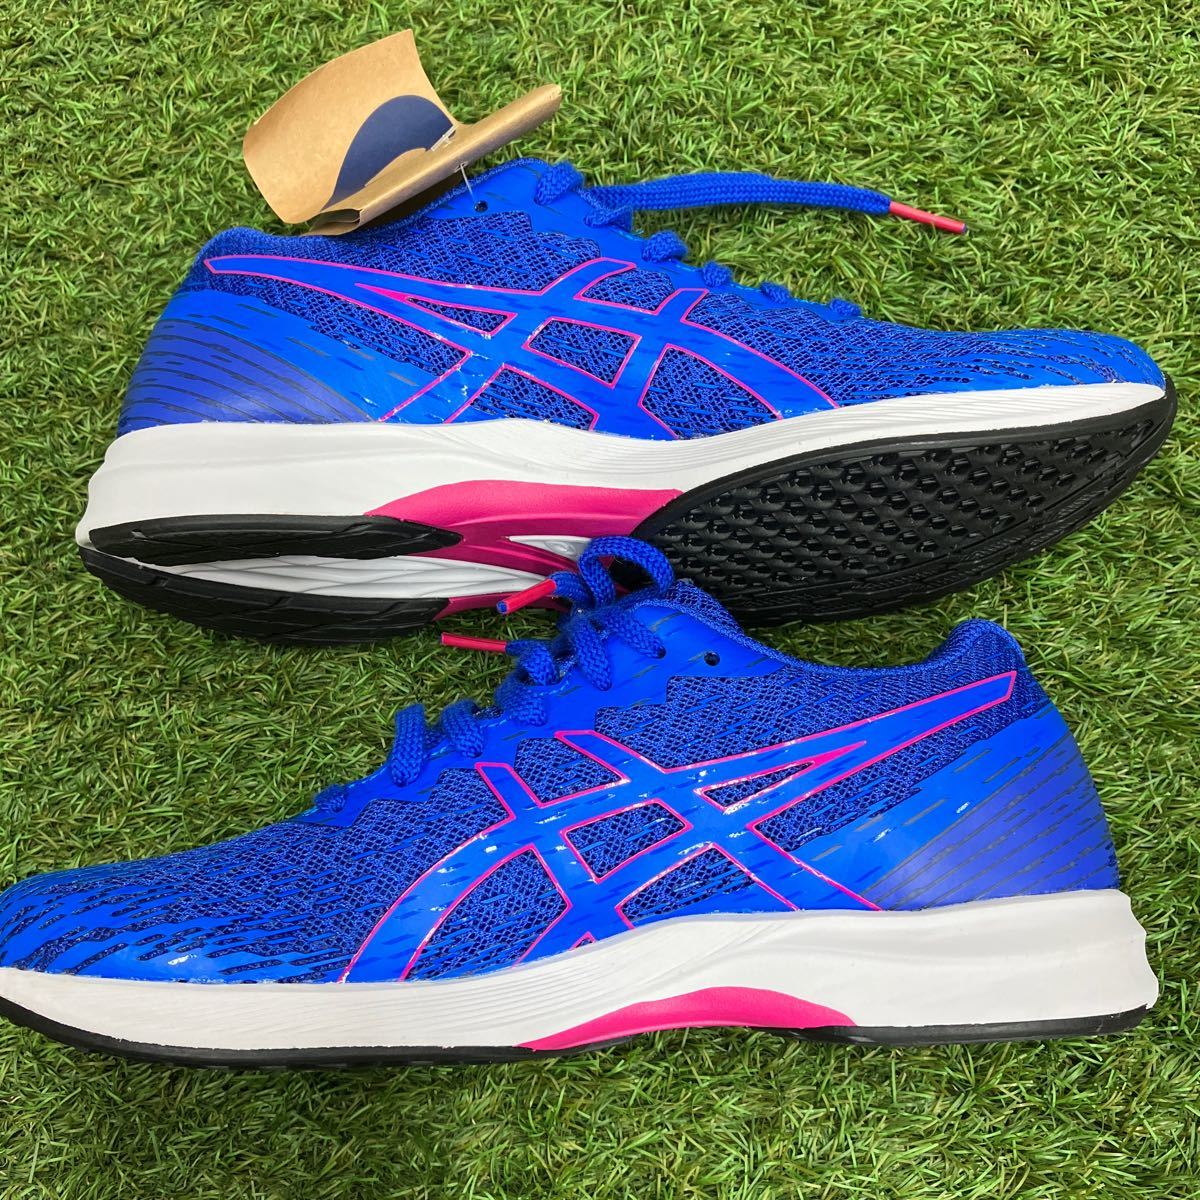 [ new goods unused ] Asics running shoes LYTERACER 3 lady's 402lapizla yellowtail blue / pin Crave 23.0 cm